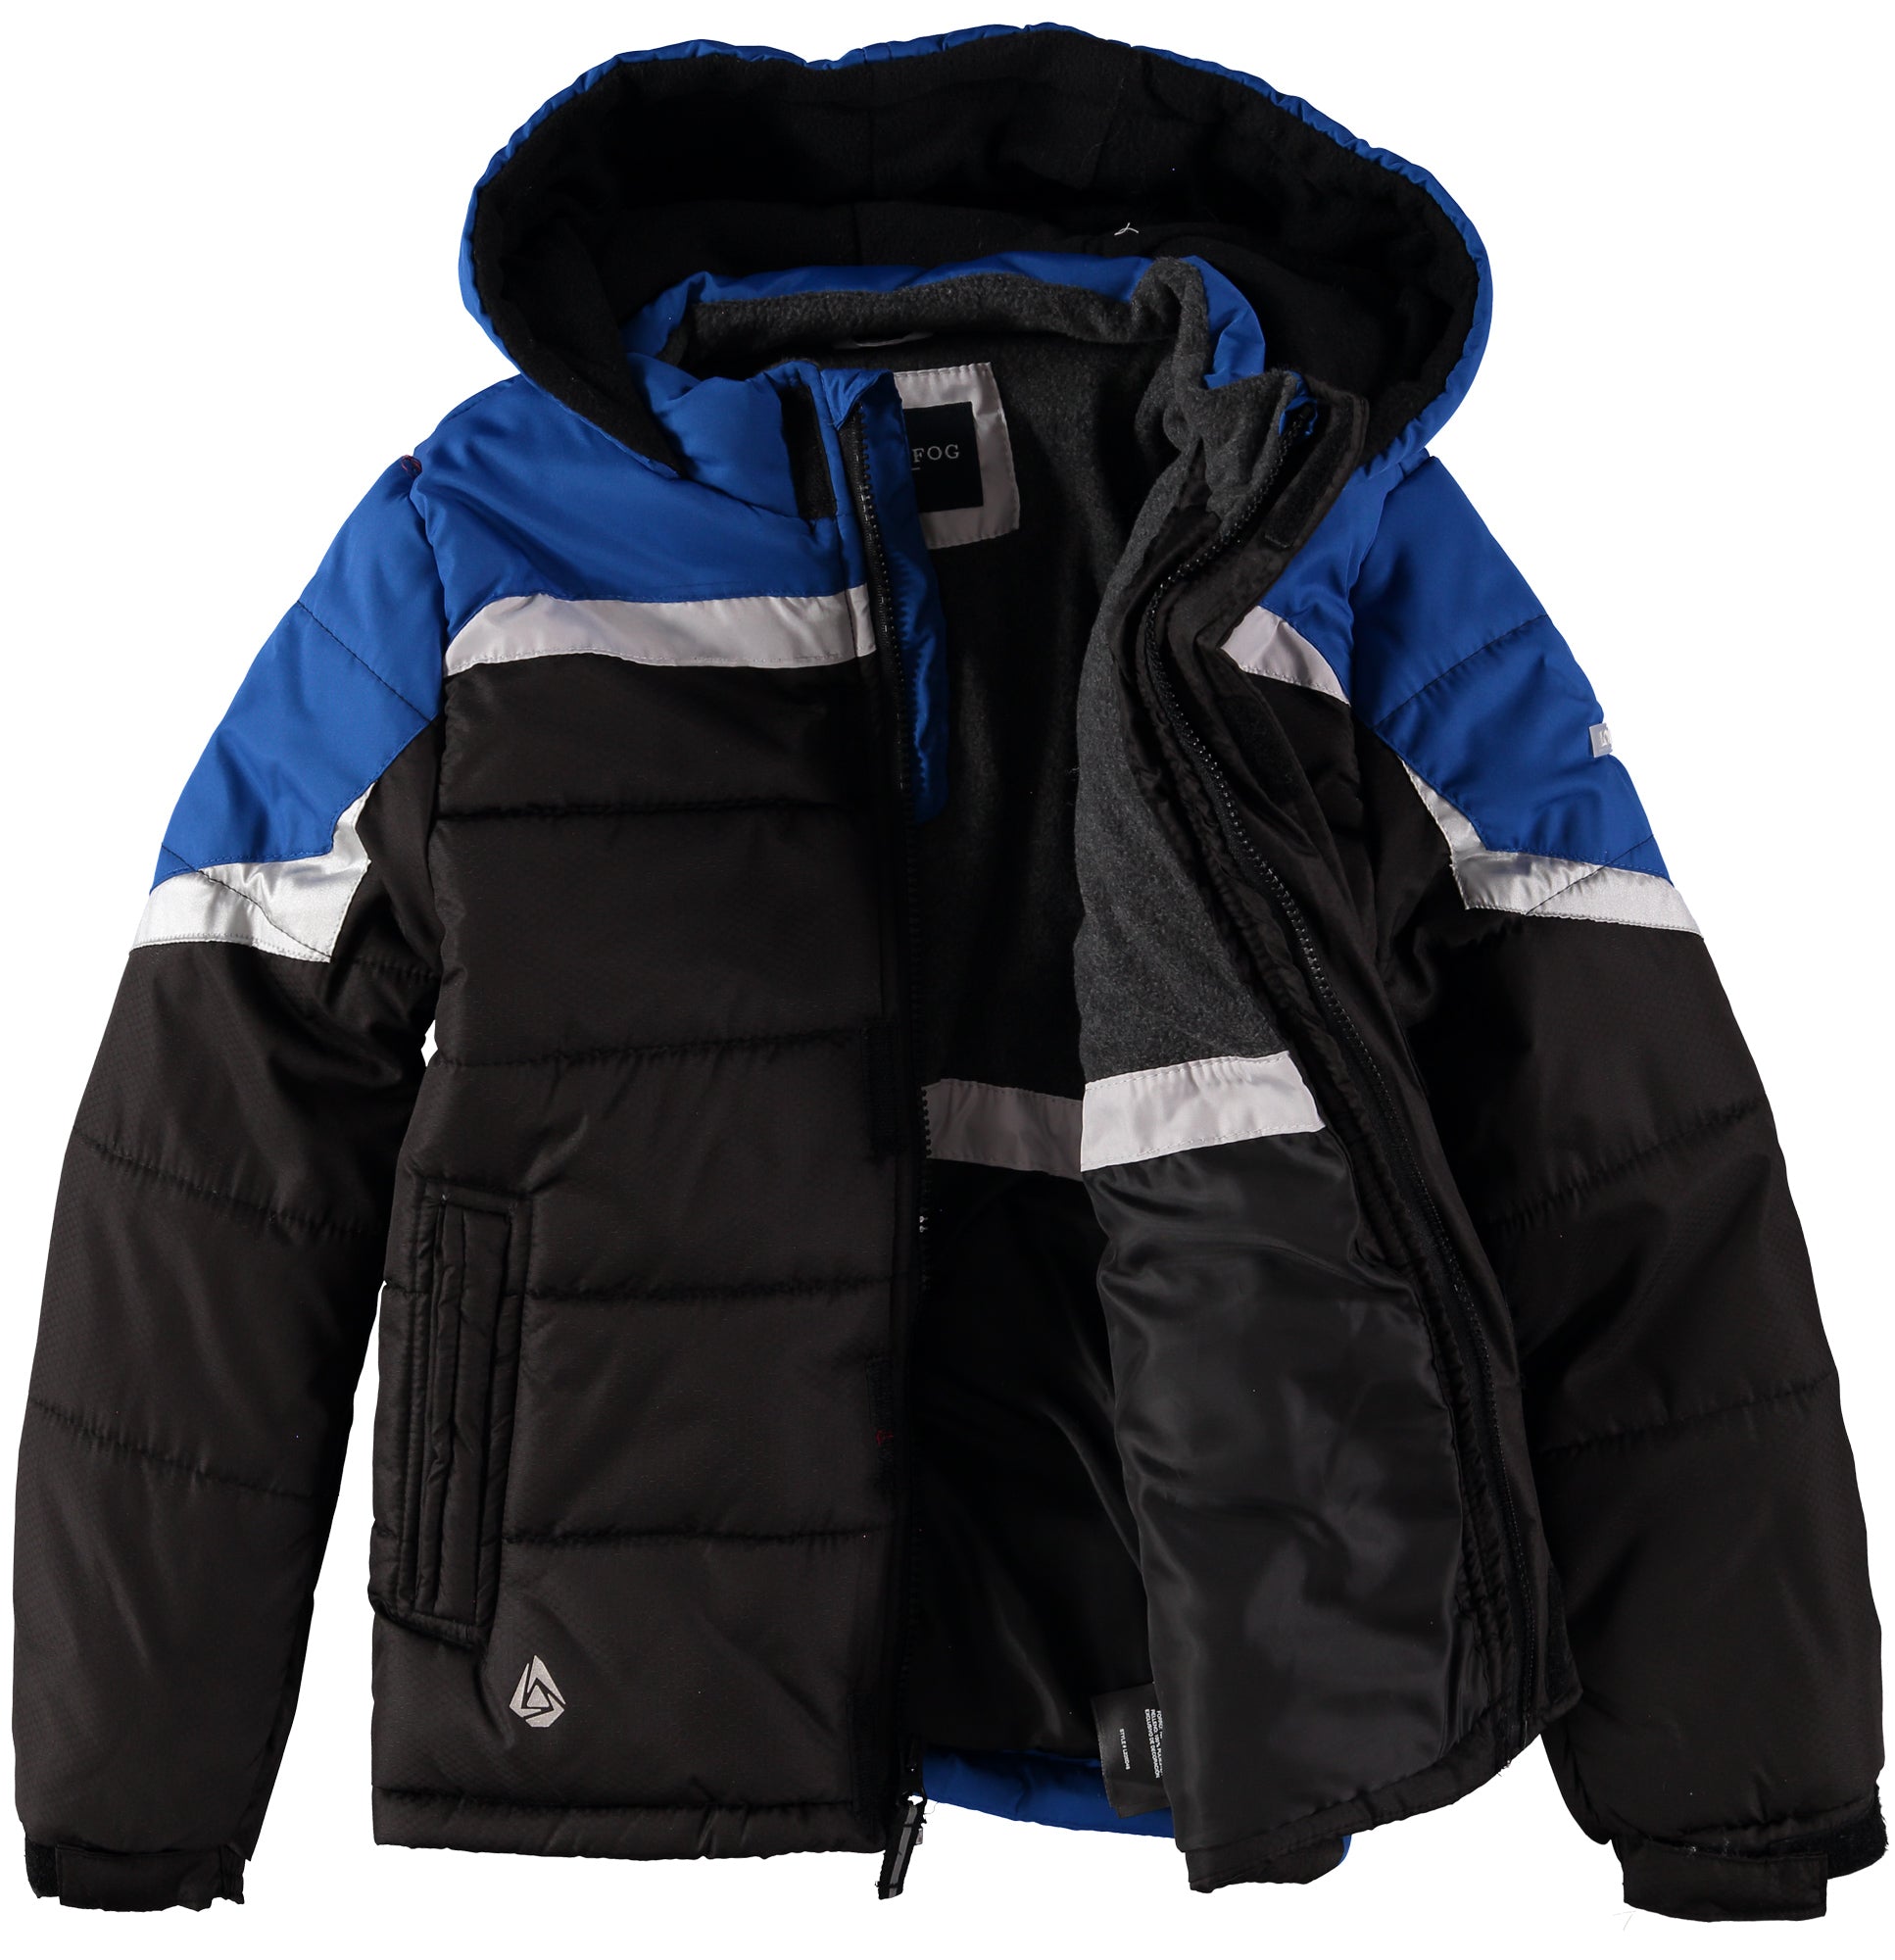 London Fog Boys 8-20 Pieced Colorblock Puffer Jacket with Hat